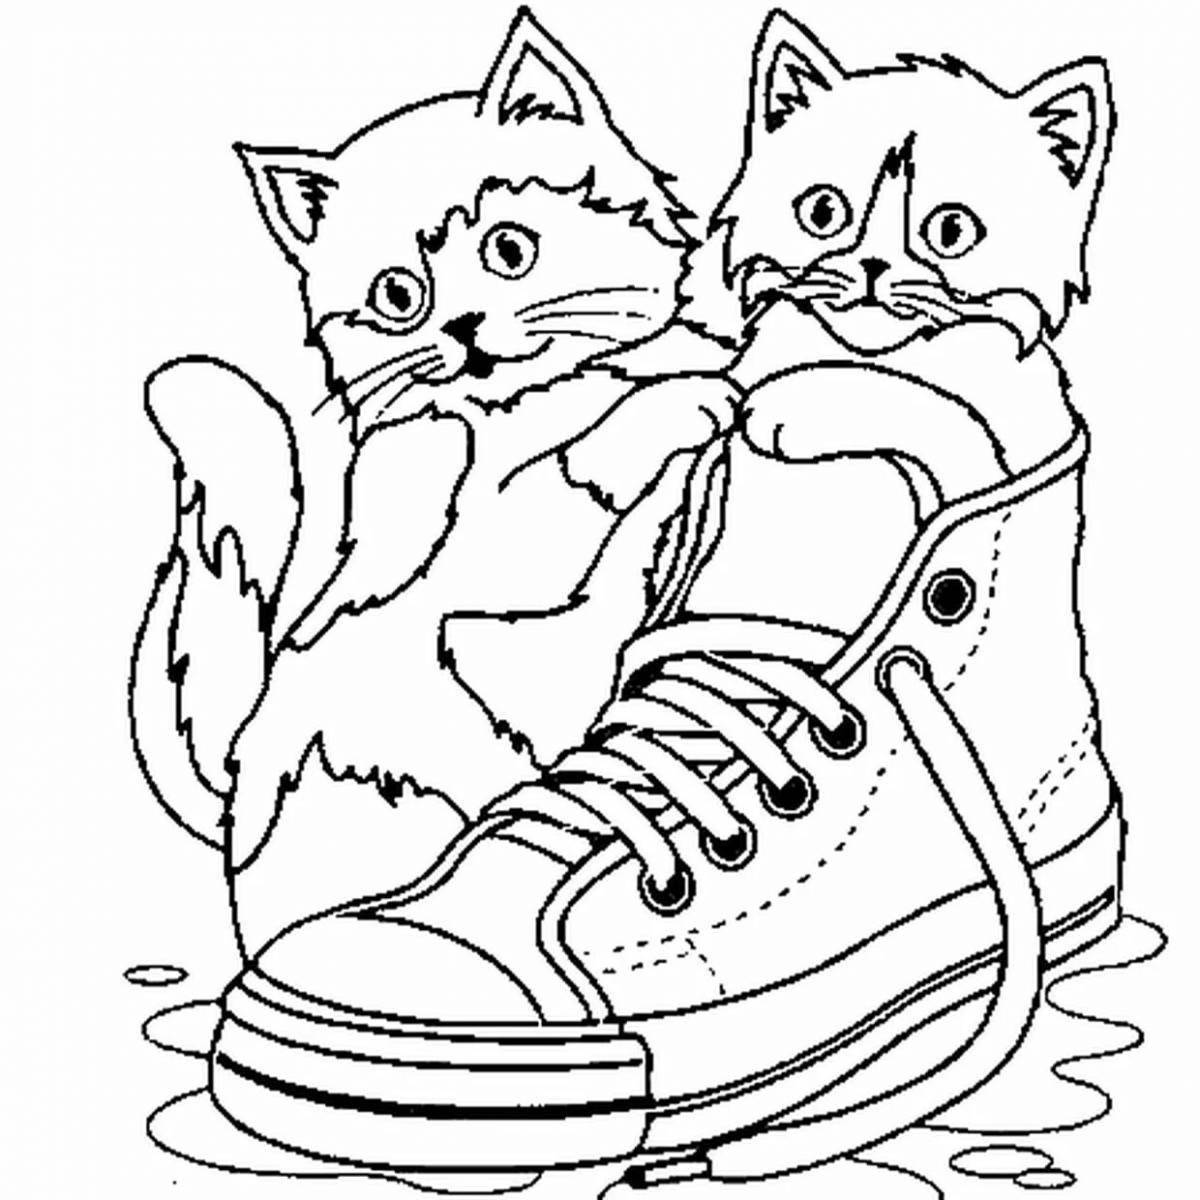 Coloring page graceful kitten